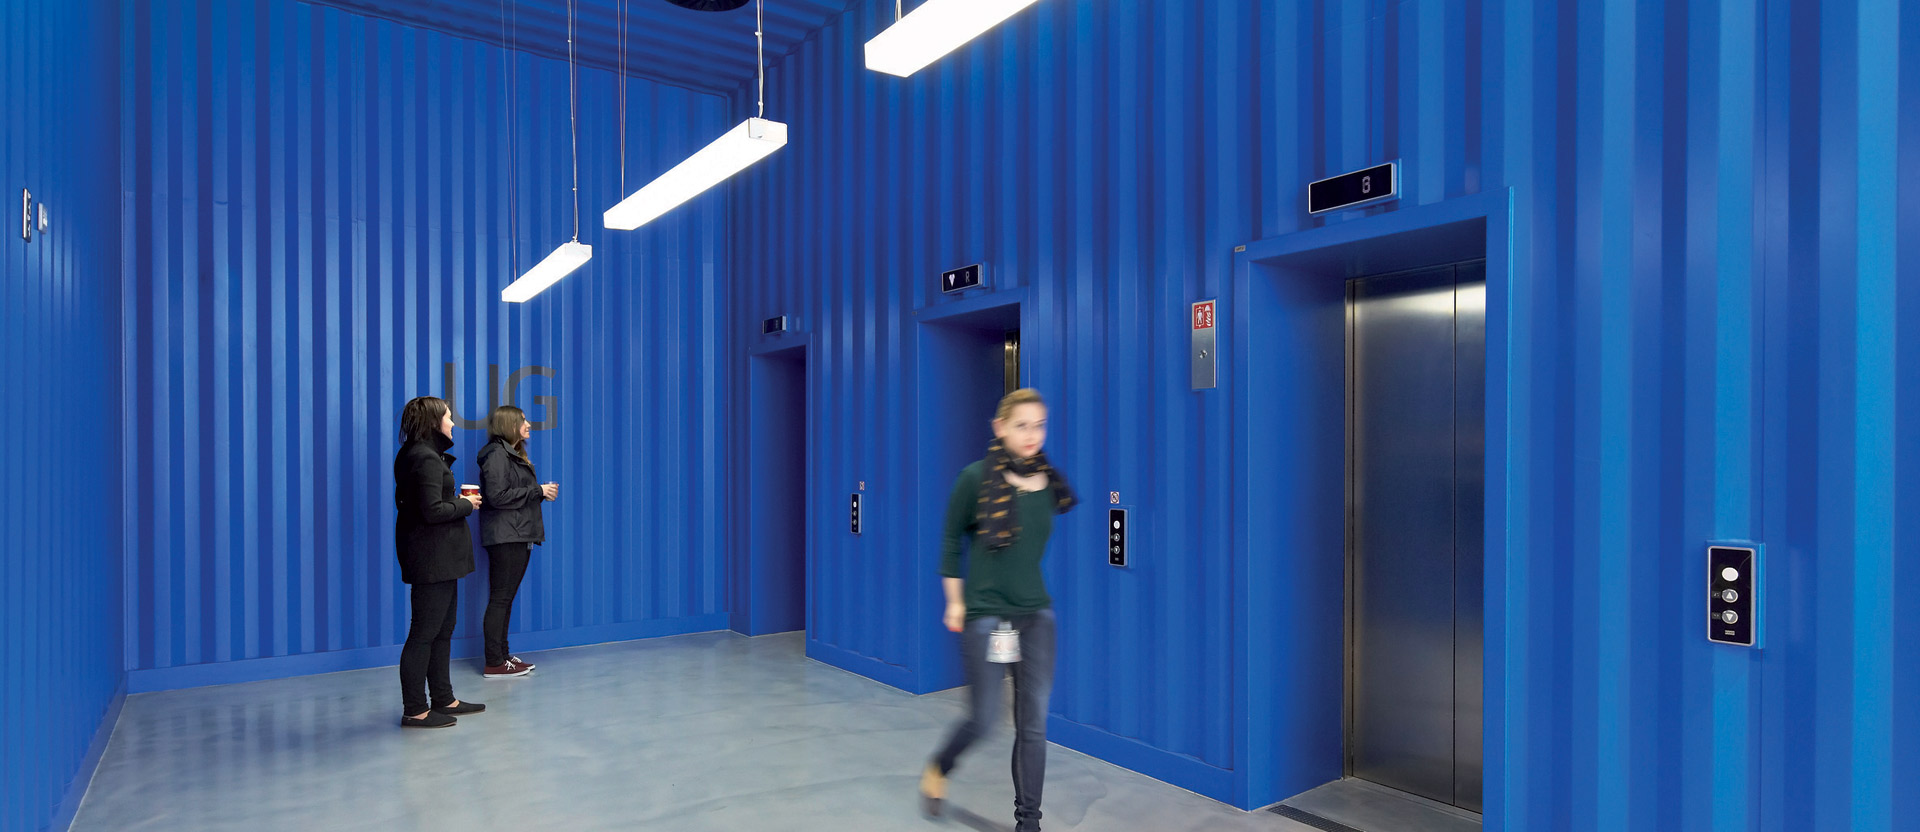 Vibrant blue corrugated metal walls contrast with a sleek white floor in a modern elevator lobby. Suspended linear lighting fixtures cast a well-distributed glow, while two individuals engage in conversation, adding a dynamic human element to the space.